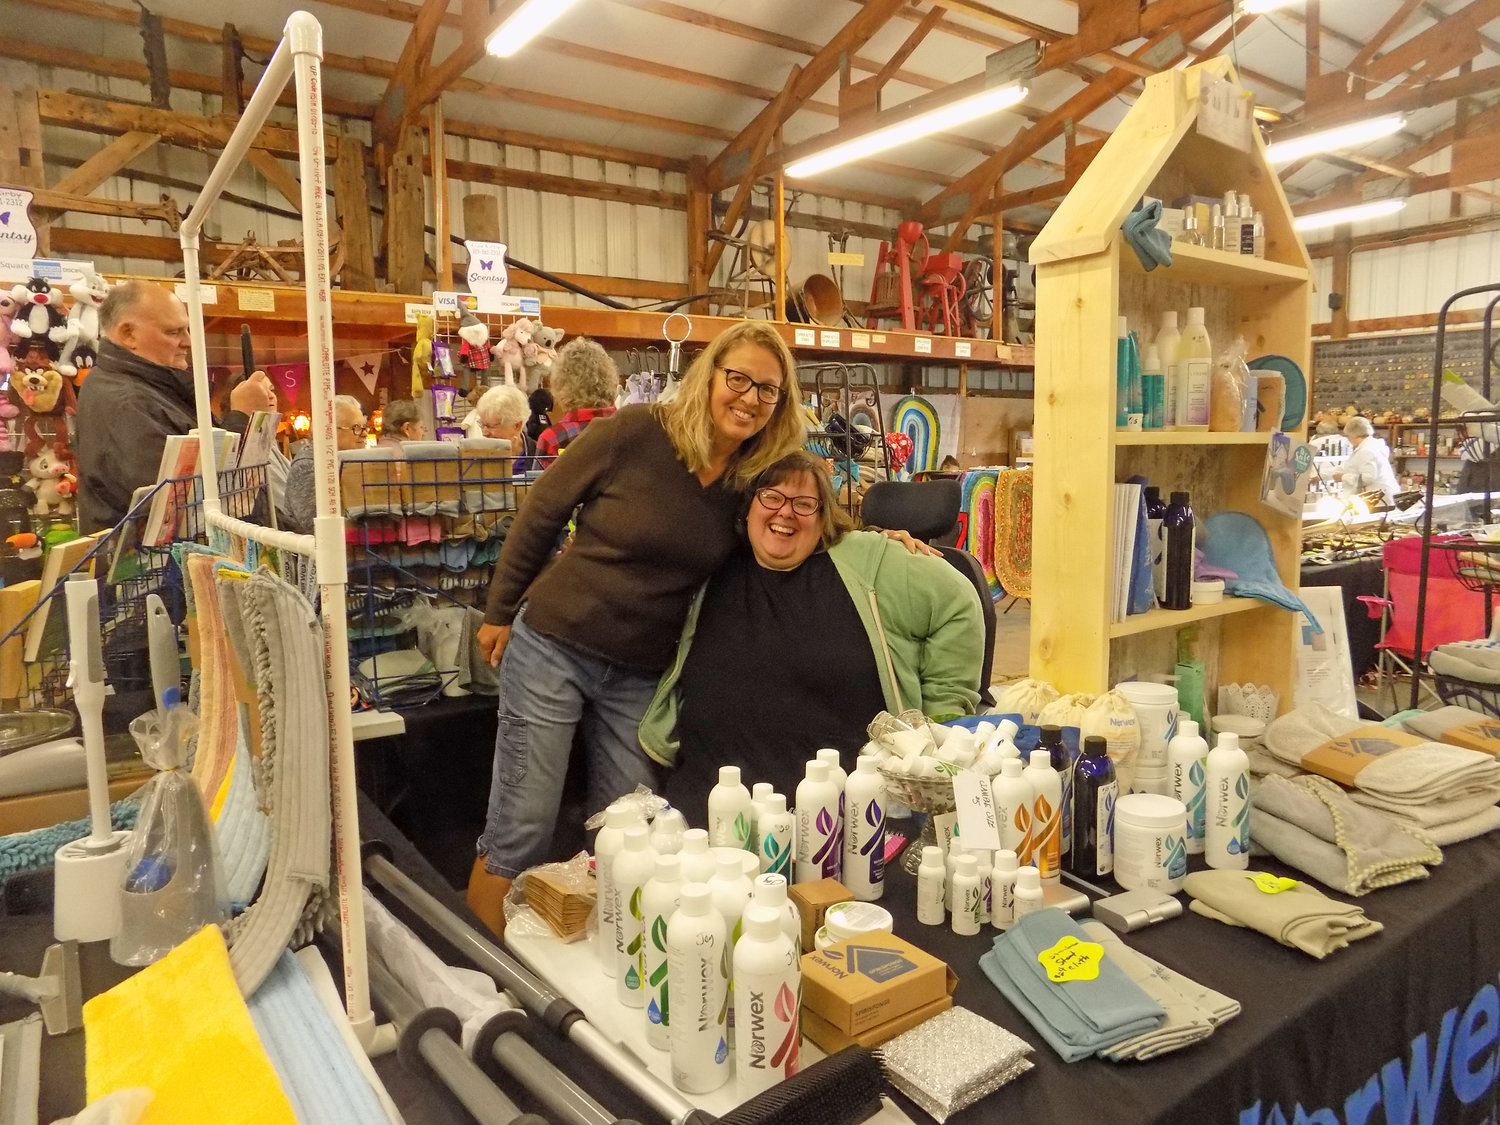 Kim Bowlan and Heather Kemp enjoyed meeting up with friends and family while also selling their wares.